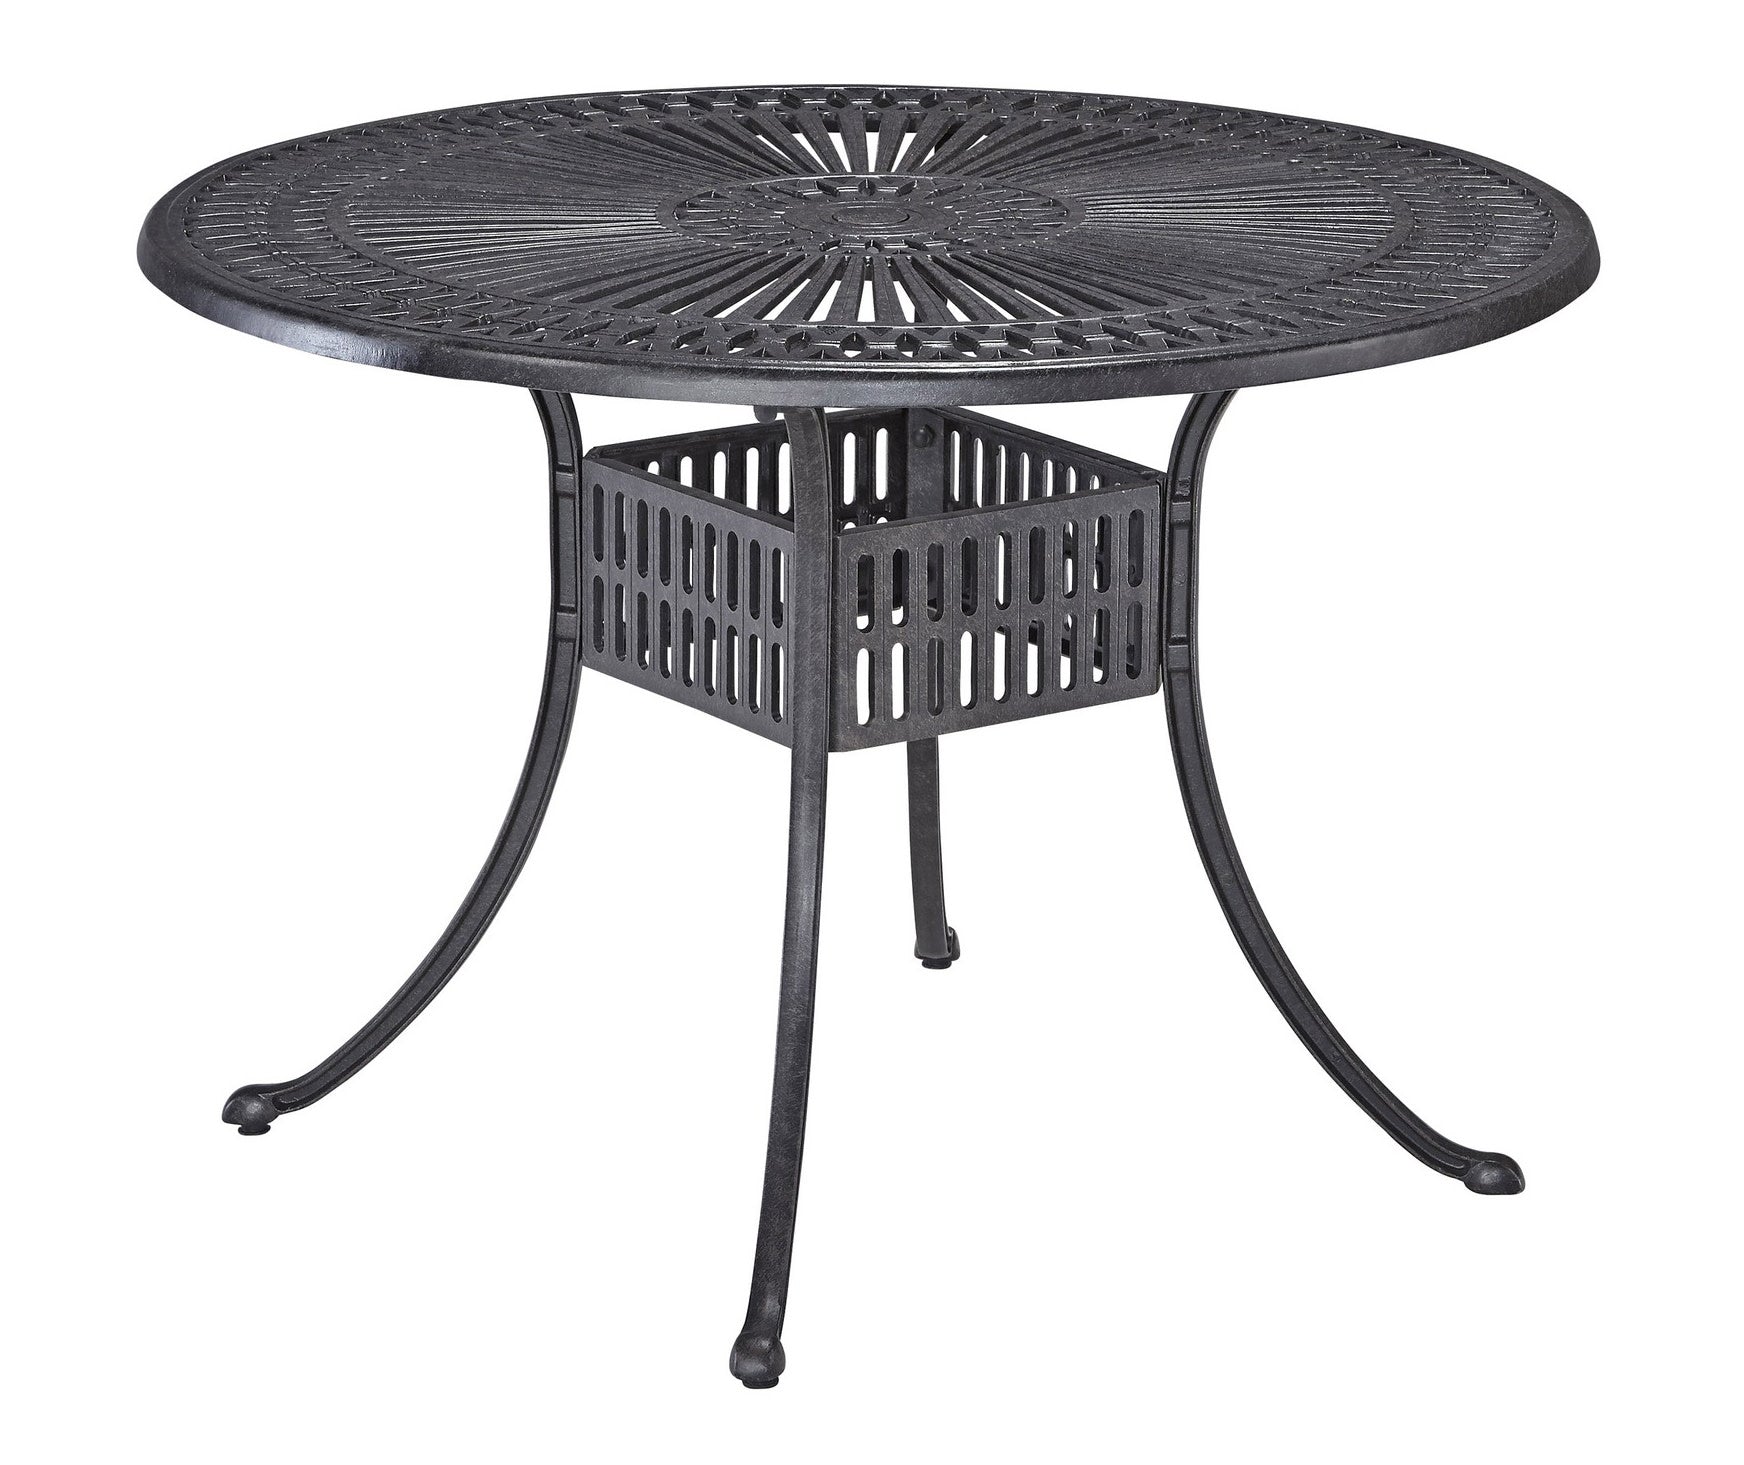 Grenada 5 Piece Outdoor Dining Set by Homestyles - Charcoal - Aluminum, Upholstered, Fabric - 6660-305C